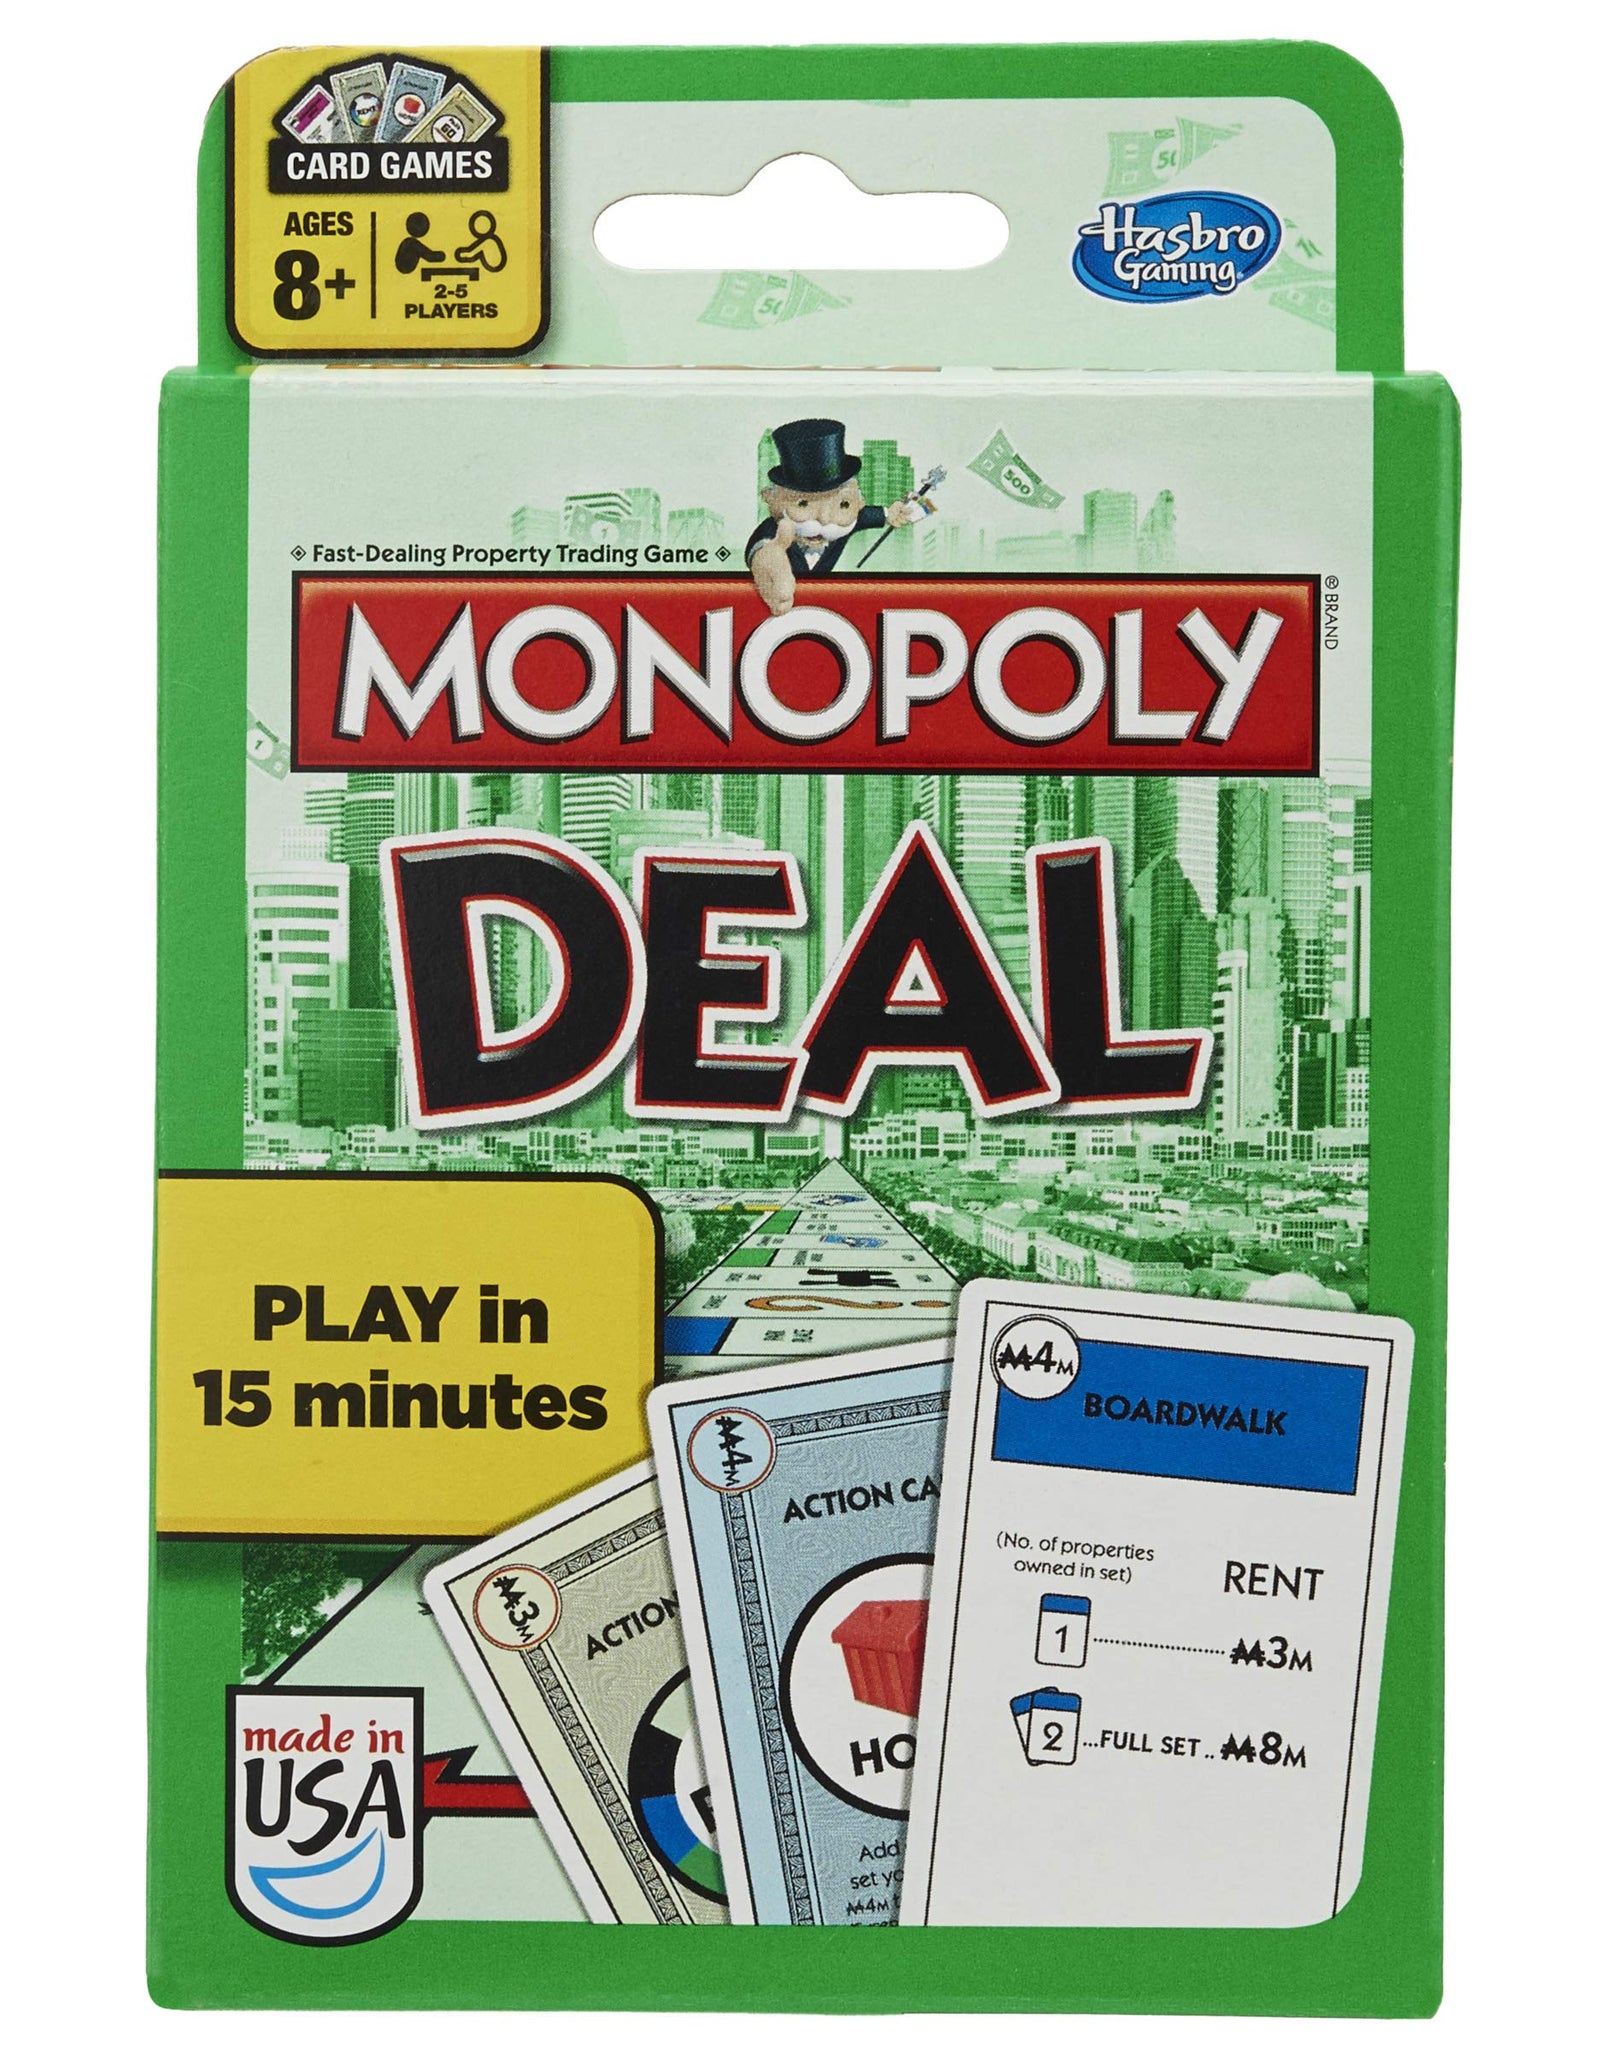 MONOPOLY Deal Card Game (Amazon Exclusive)